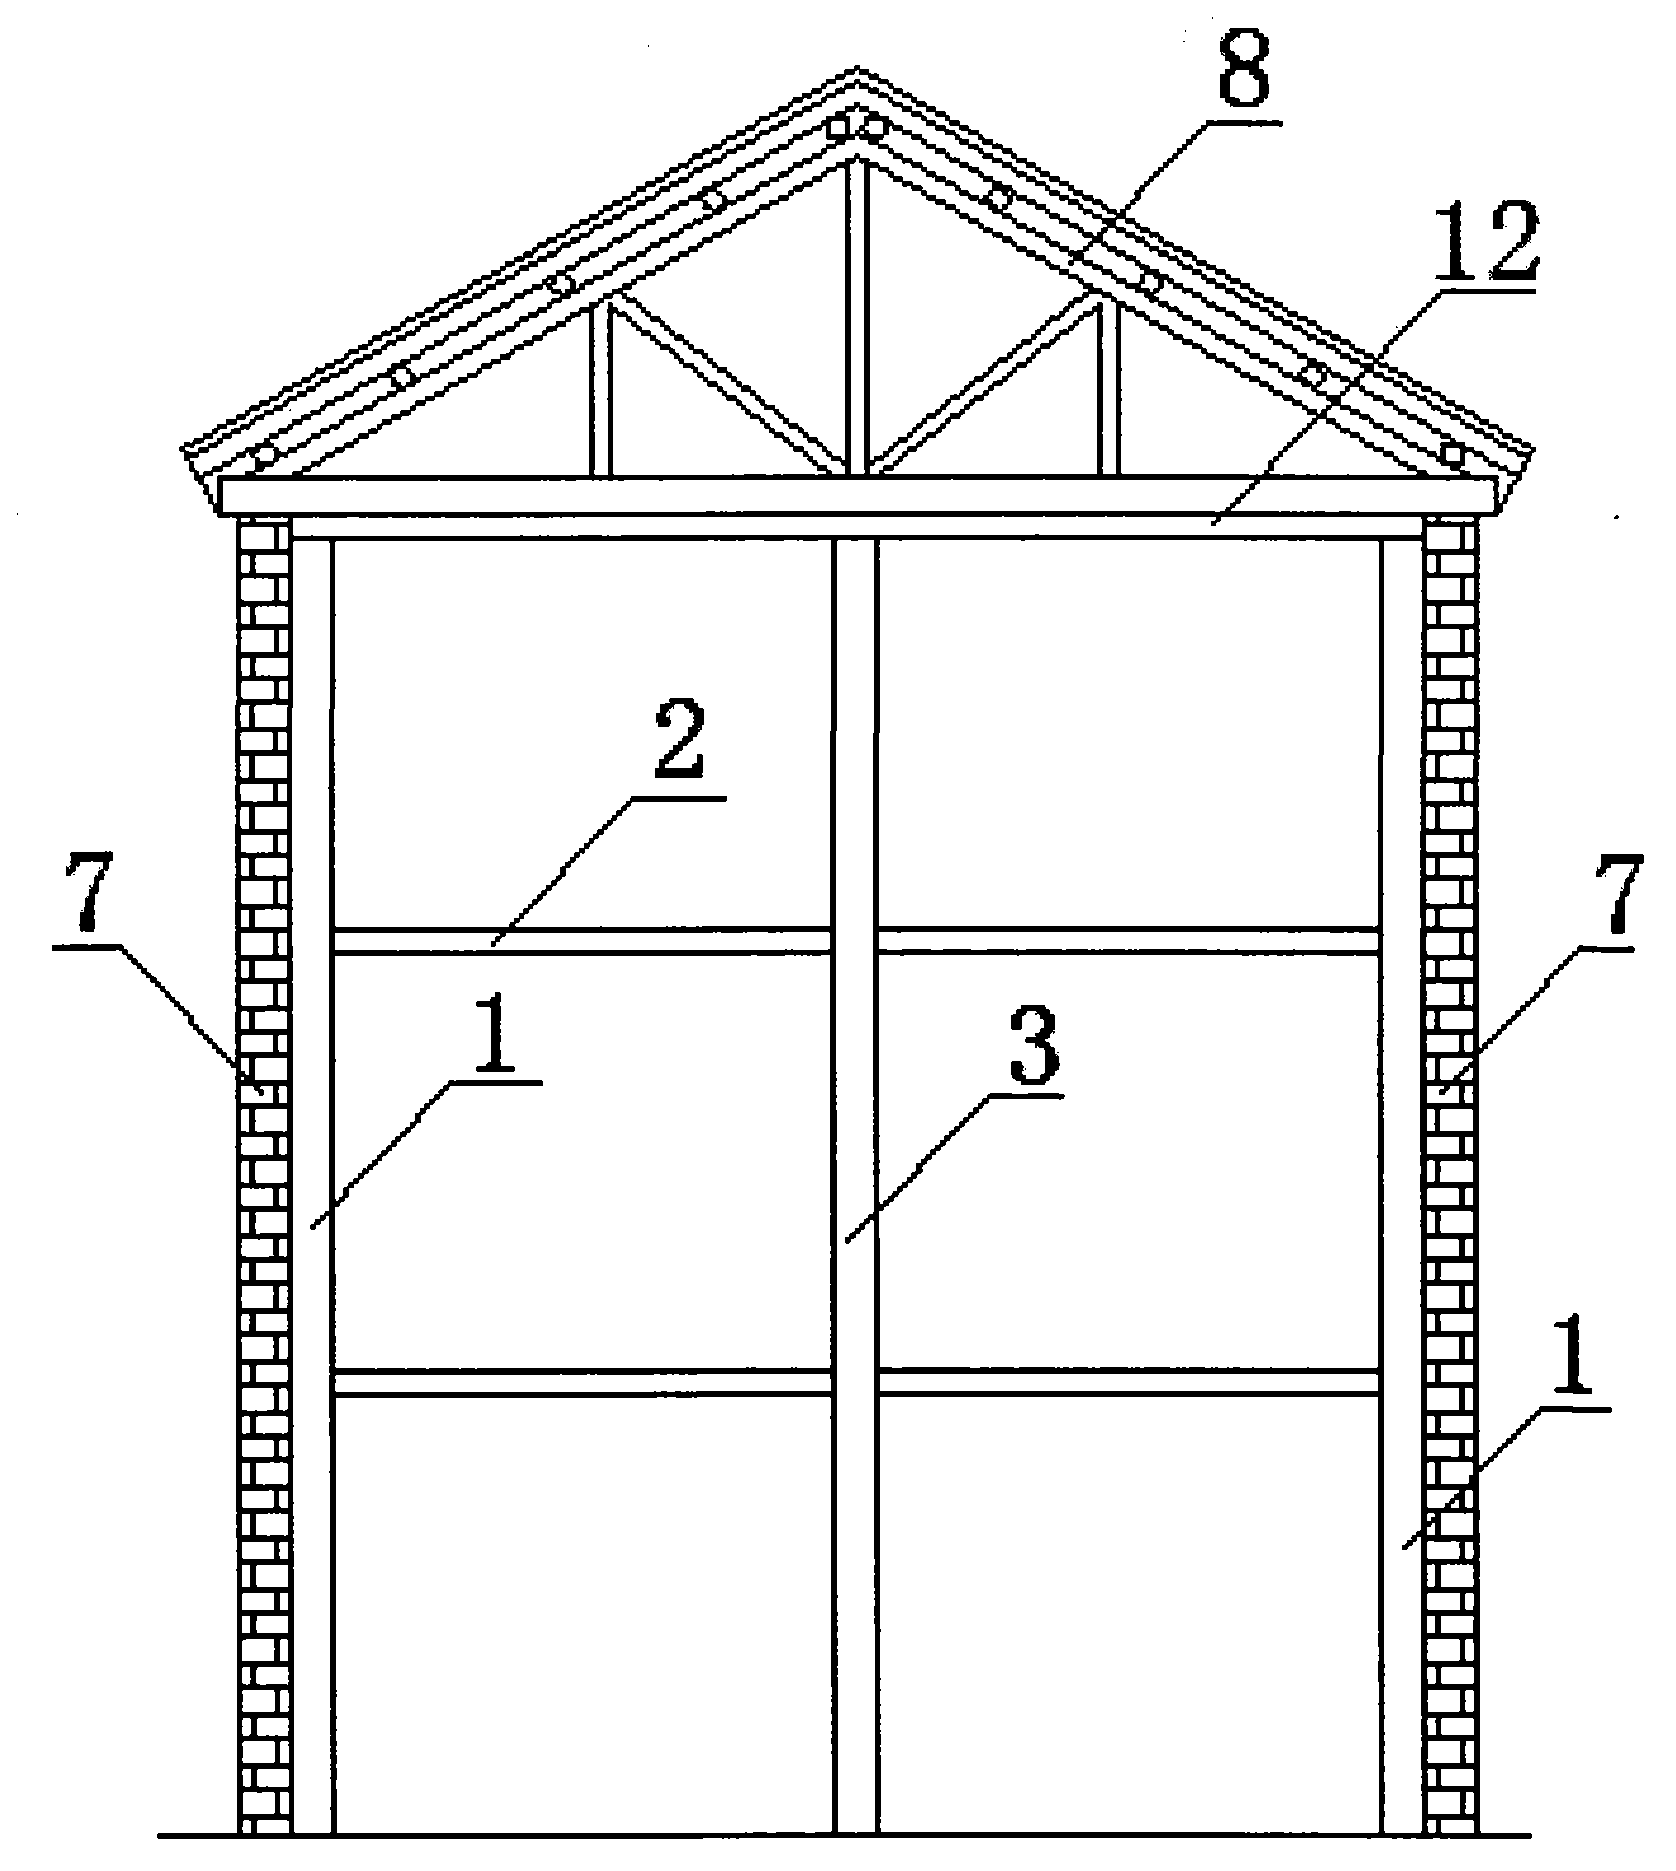 Inner steel frame reinforced structure of pseudo-classic architecture and construction method thereof